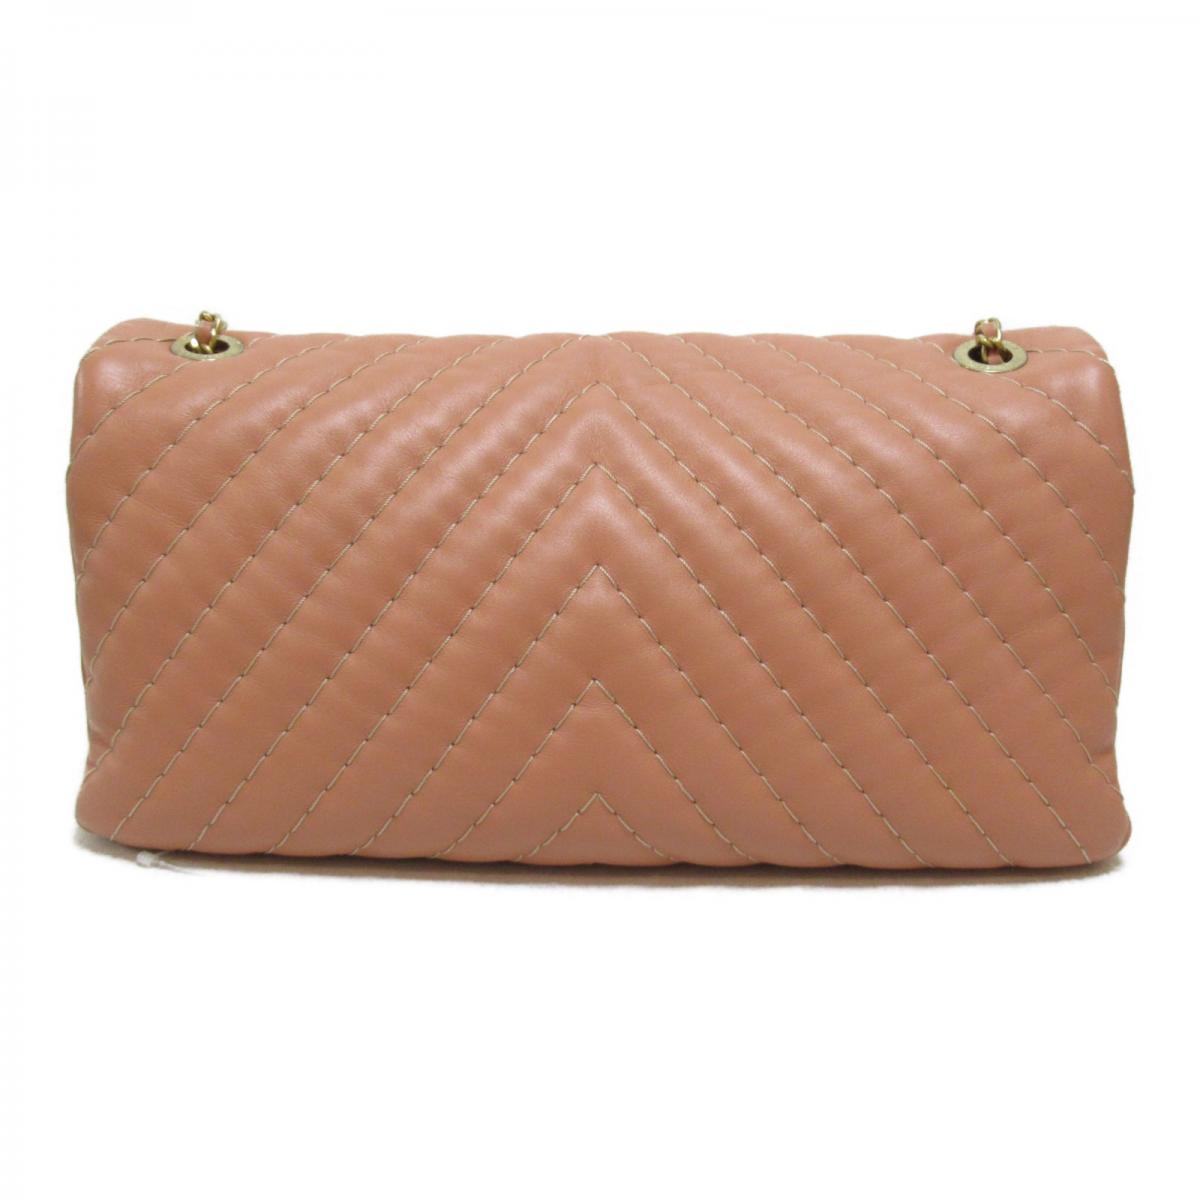 CC Quilted Leather Single Flap Bag